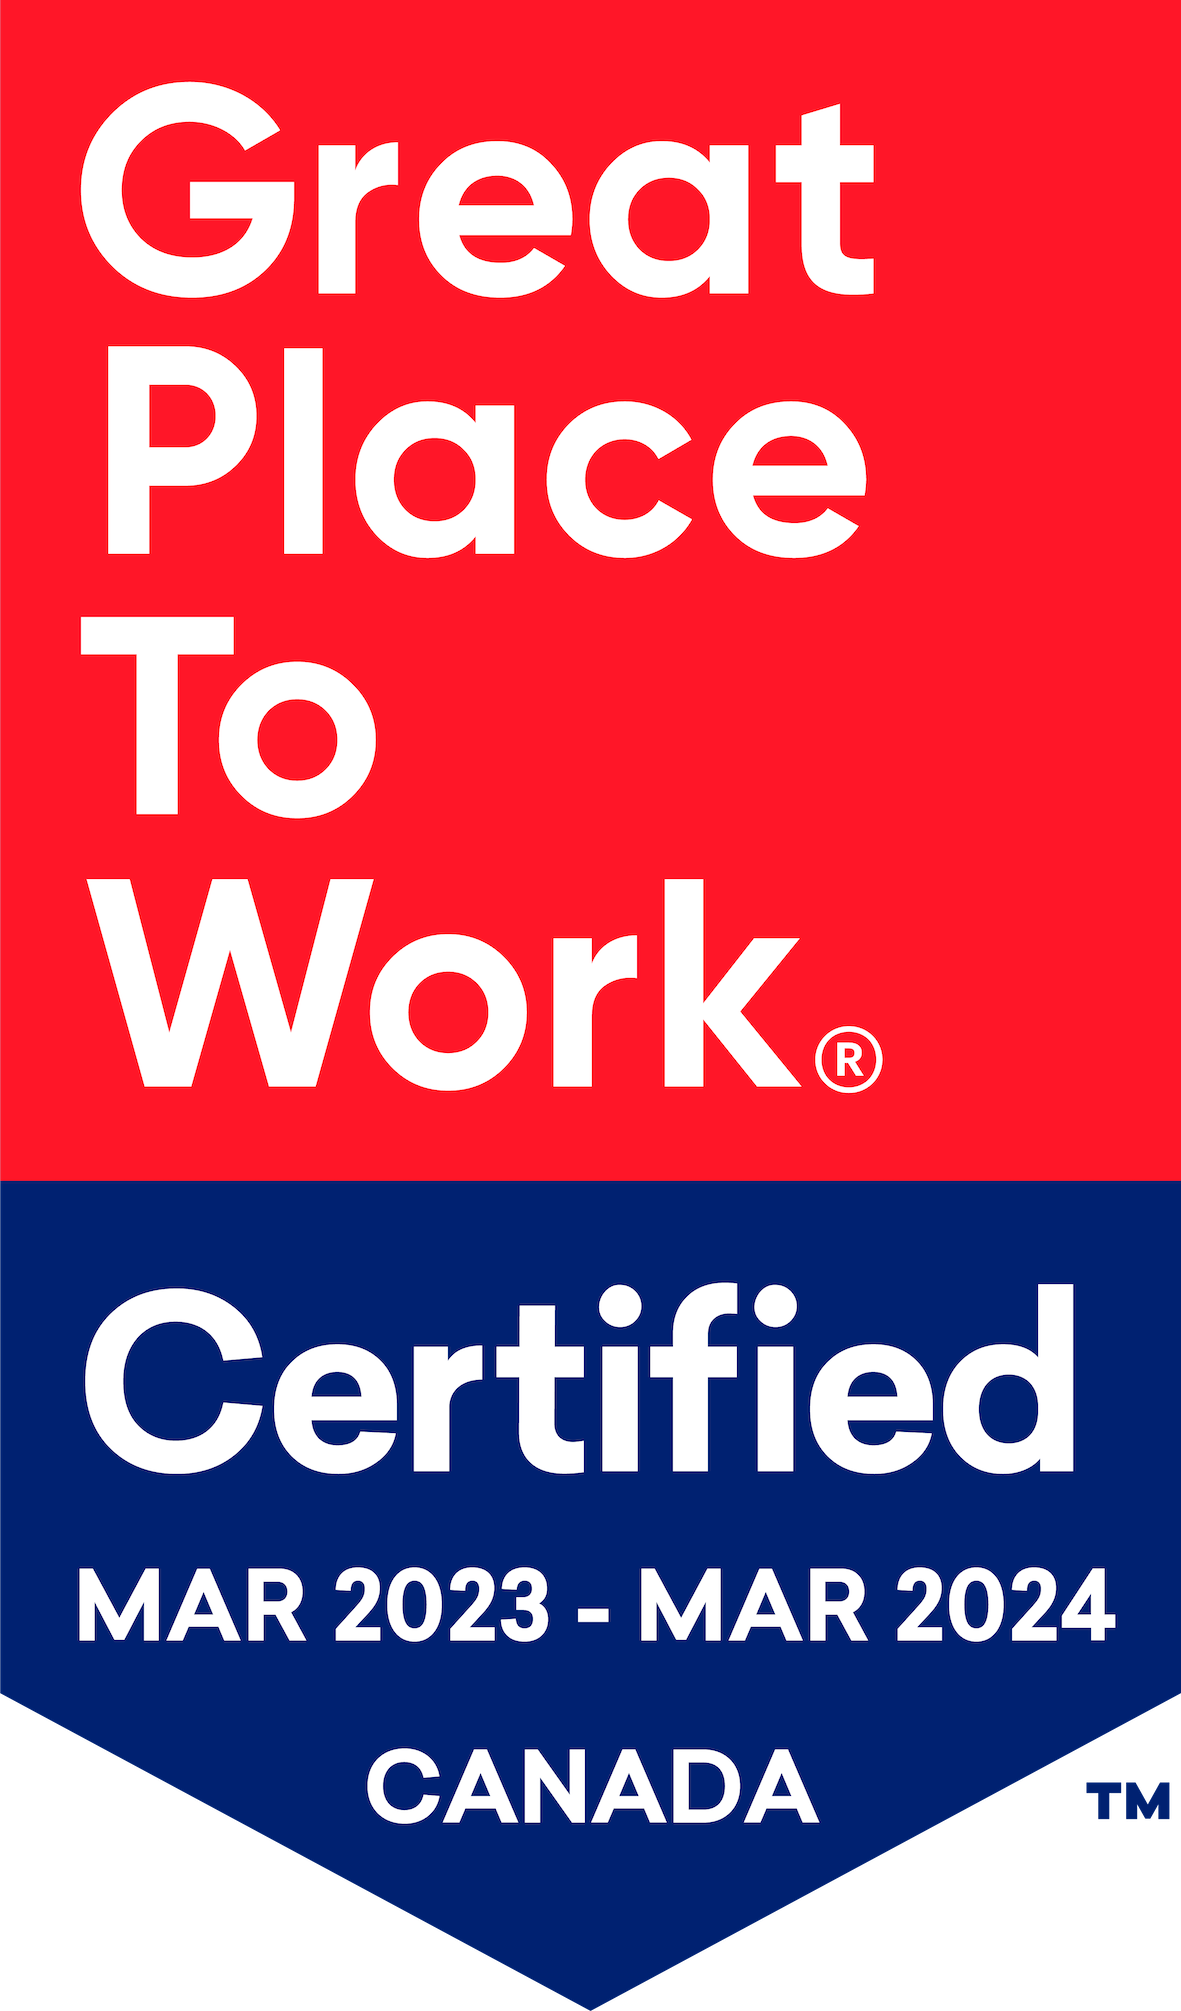 Great Place To Work Certified.